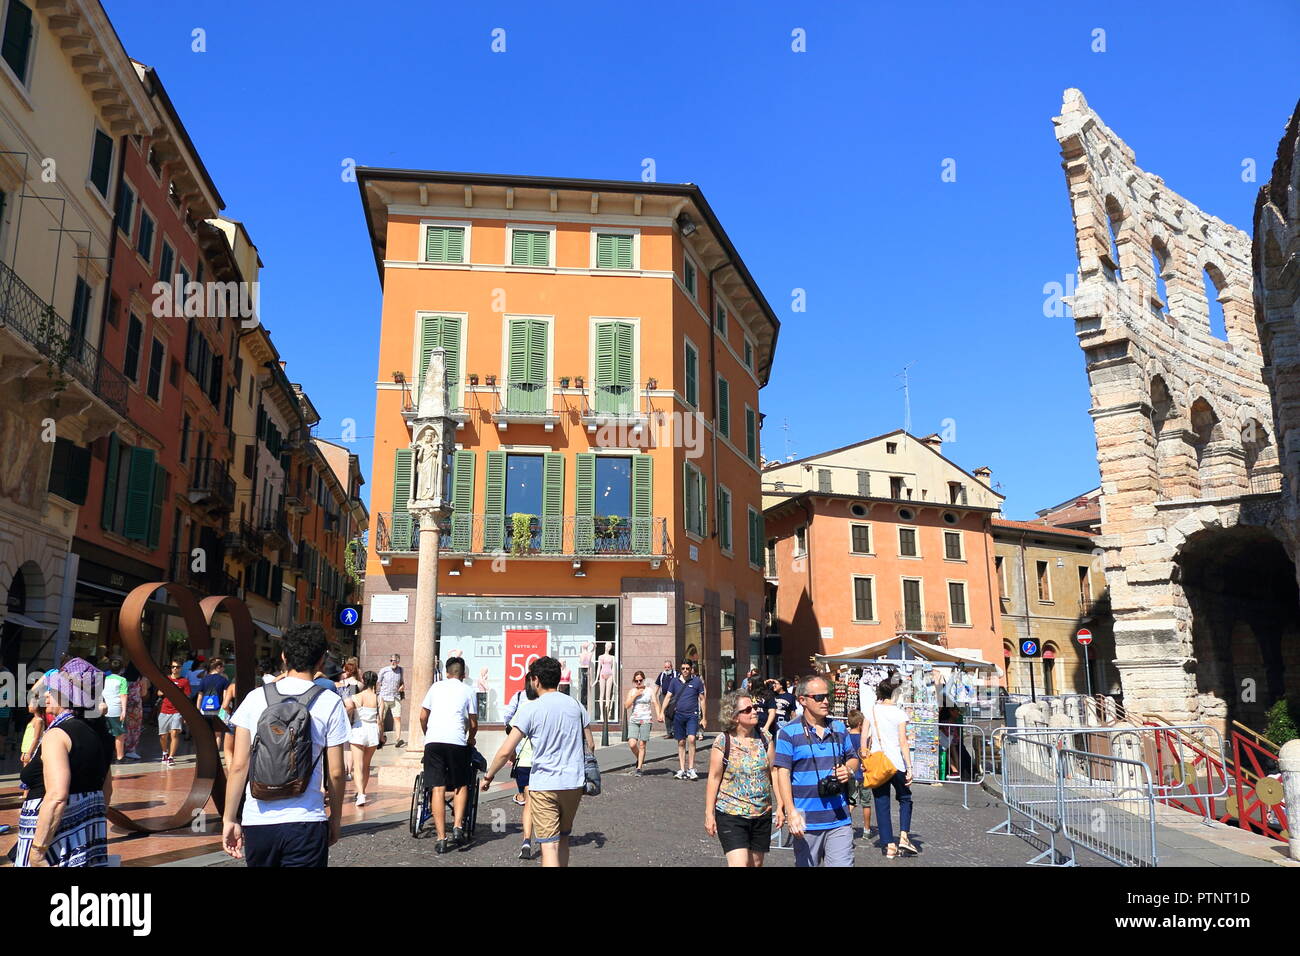 Piazza Bra- the largest piazza in Verona,Italy,The piazza is lined with ...